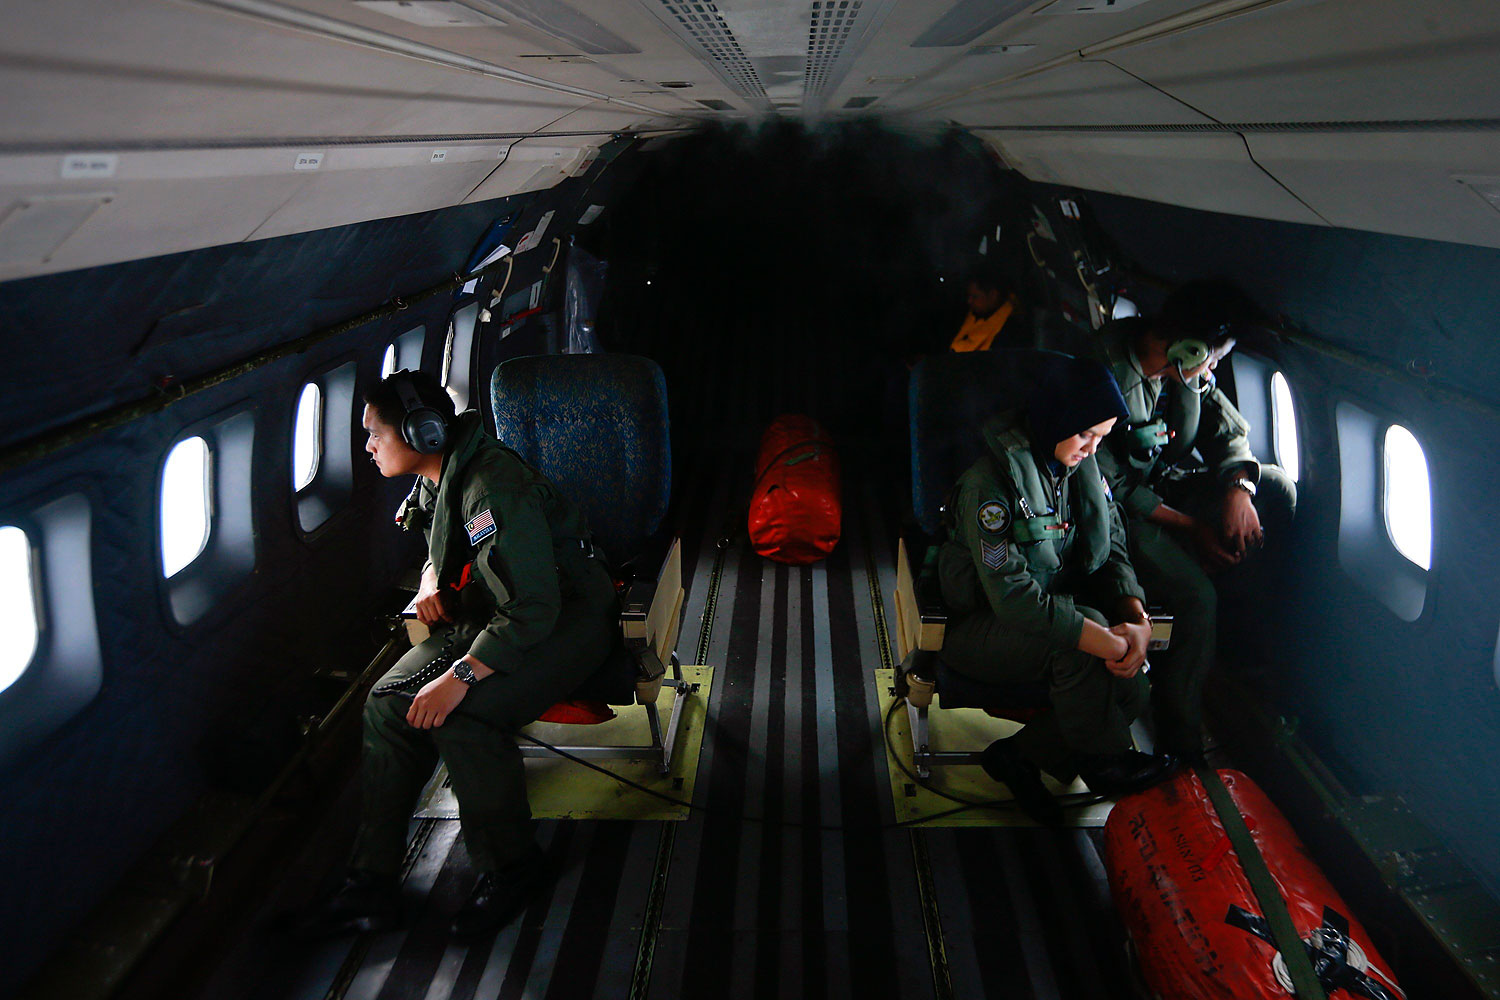 Crew members from the Royal Malaysian Air Force look through windows of an aircraft during an operation to find Malaysia Airlines Flight 370 in the Strait of Malacca on March 13, 2014 (Samsul Said—Reuters)